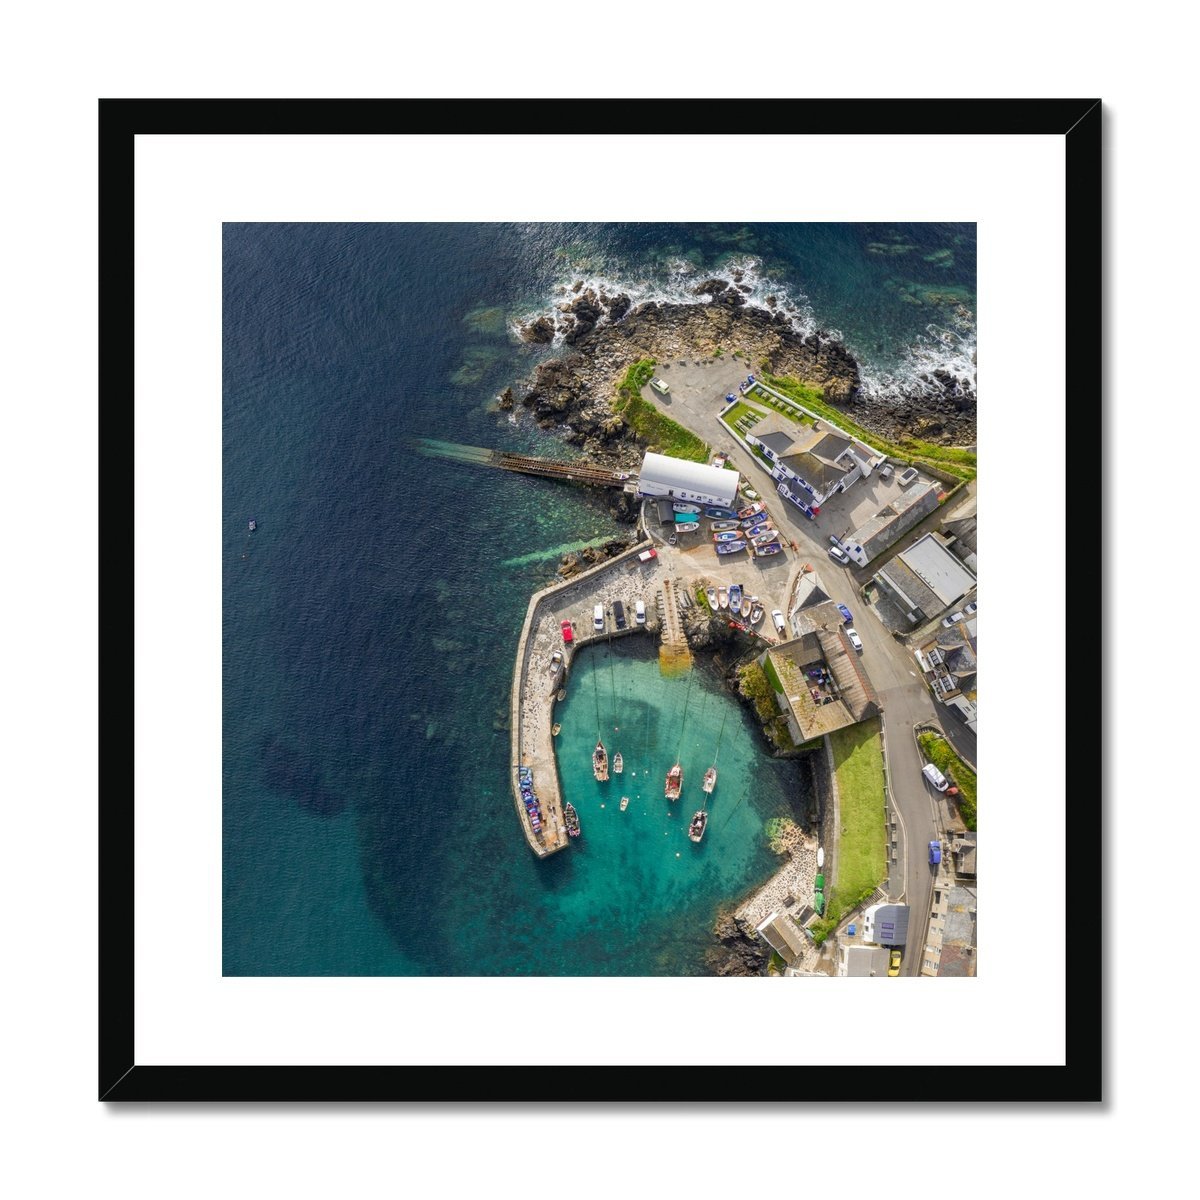 coverack from above framed print